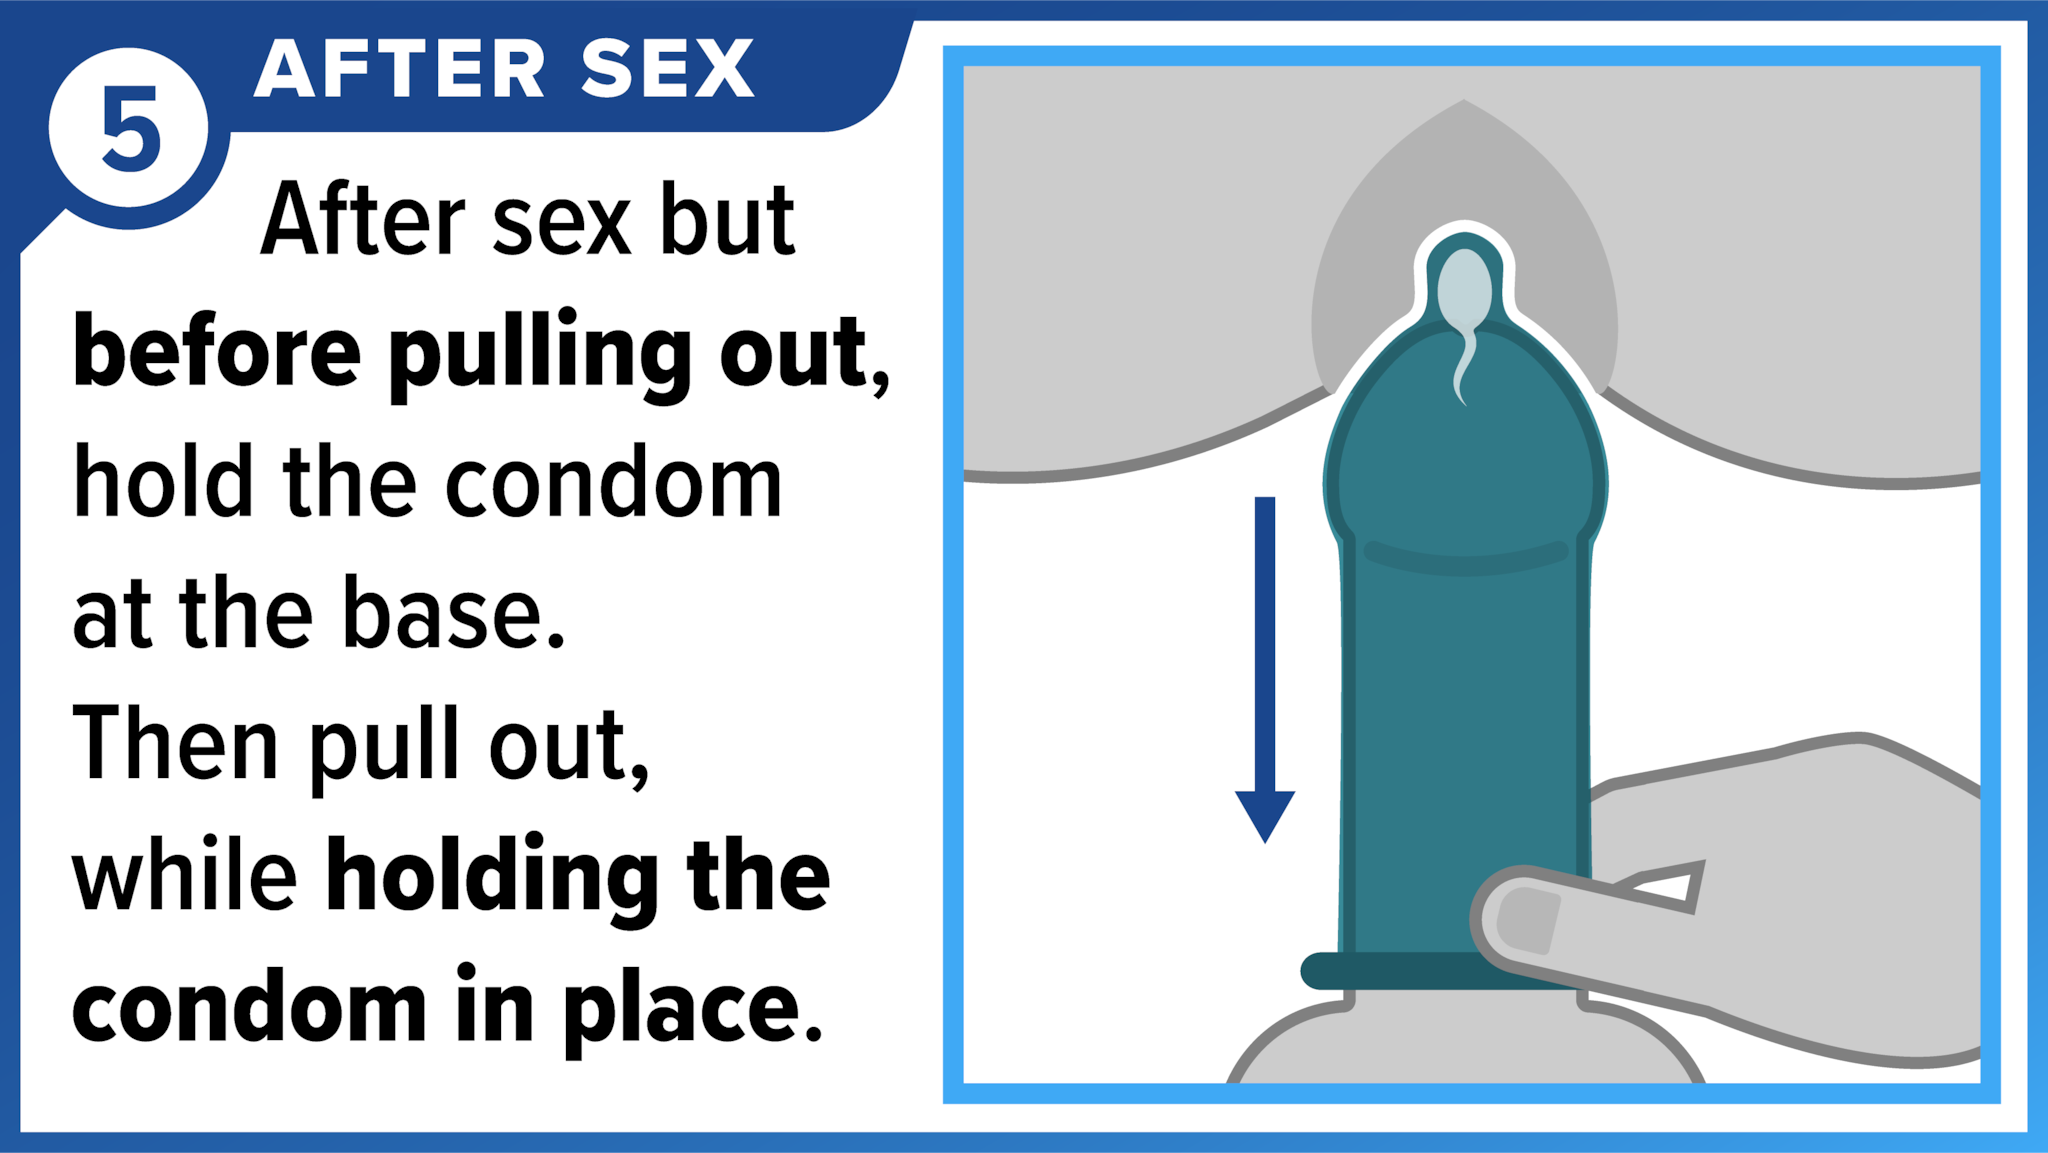 Hand holding the base of the condom while pulling out the penis. After sex - Before pulling out, hold the condom at the base, then pull out while holding the condom in place.